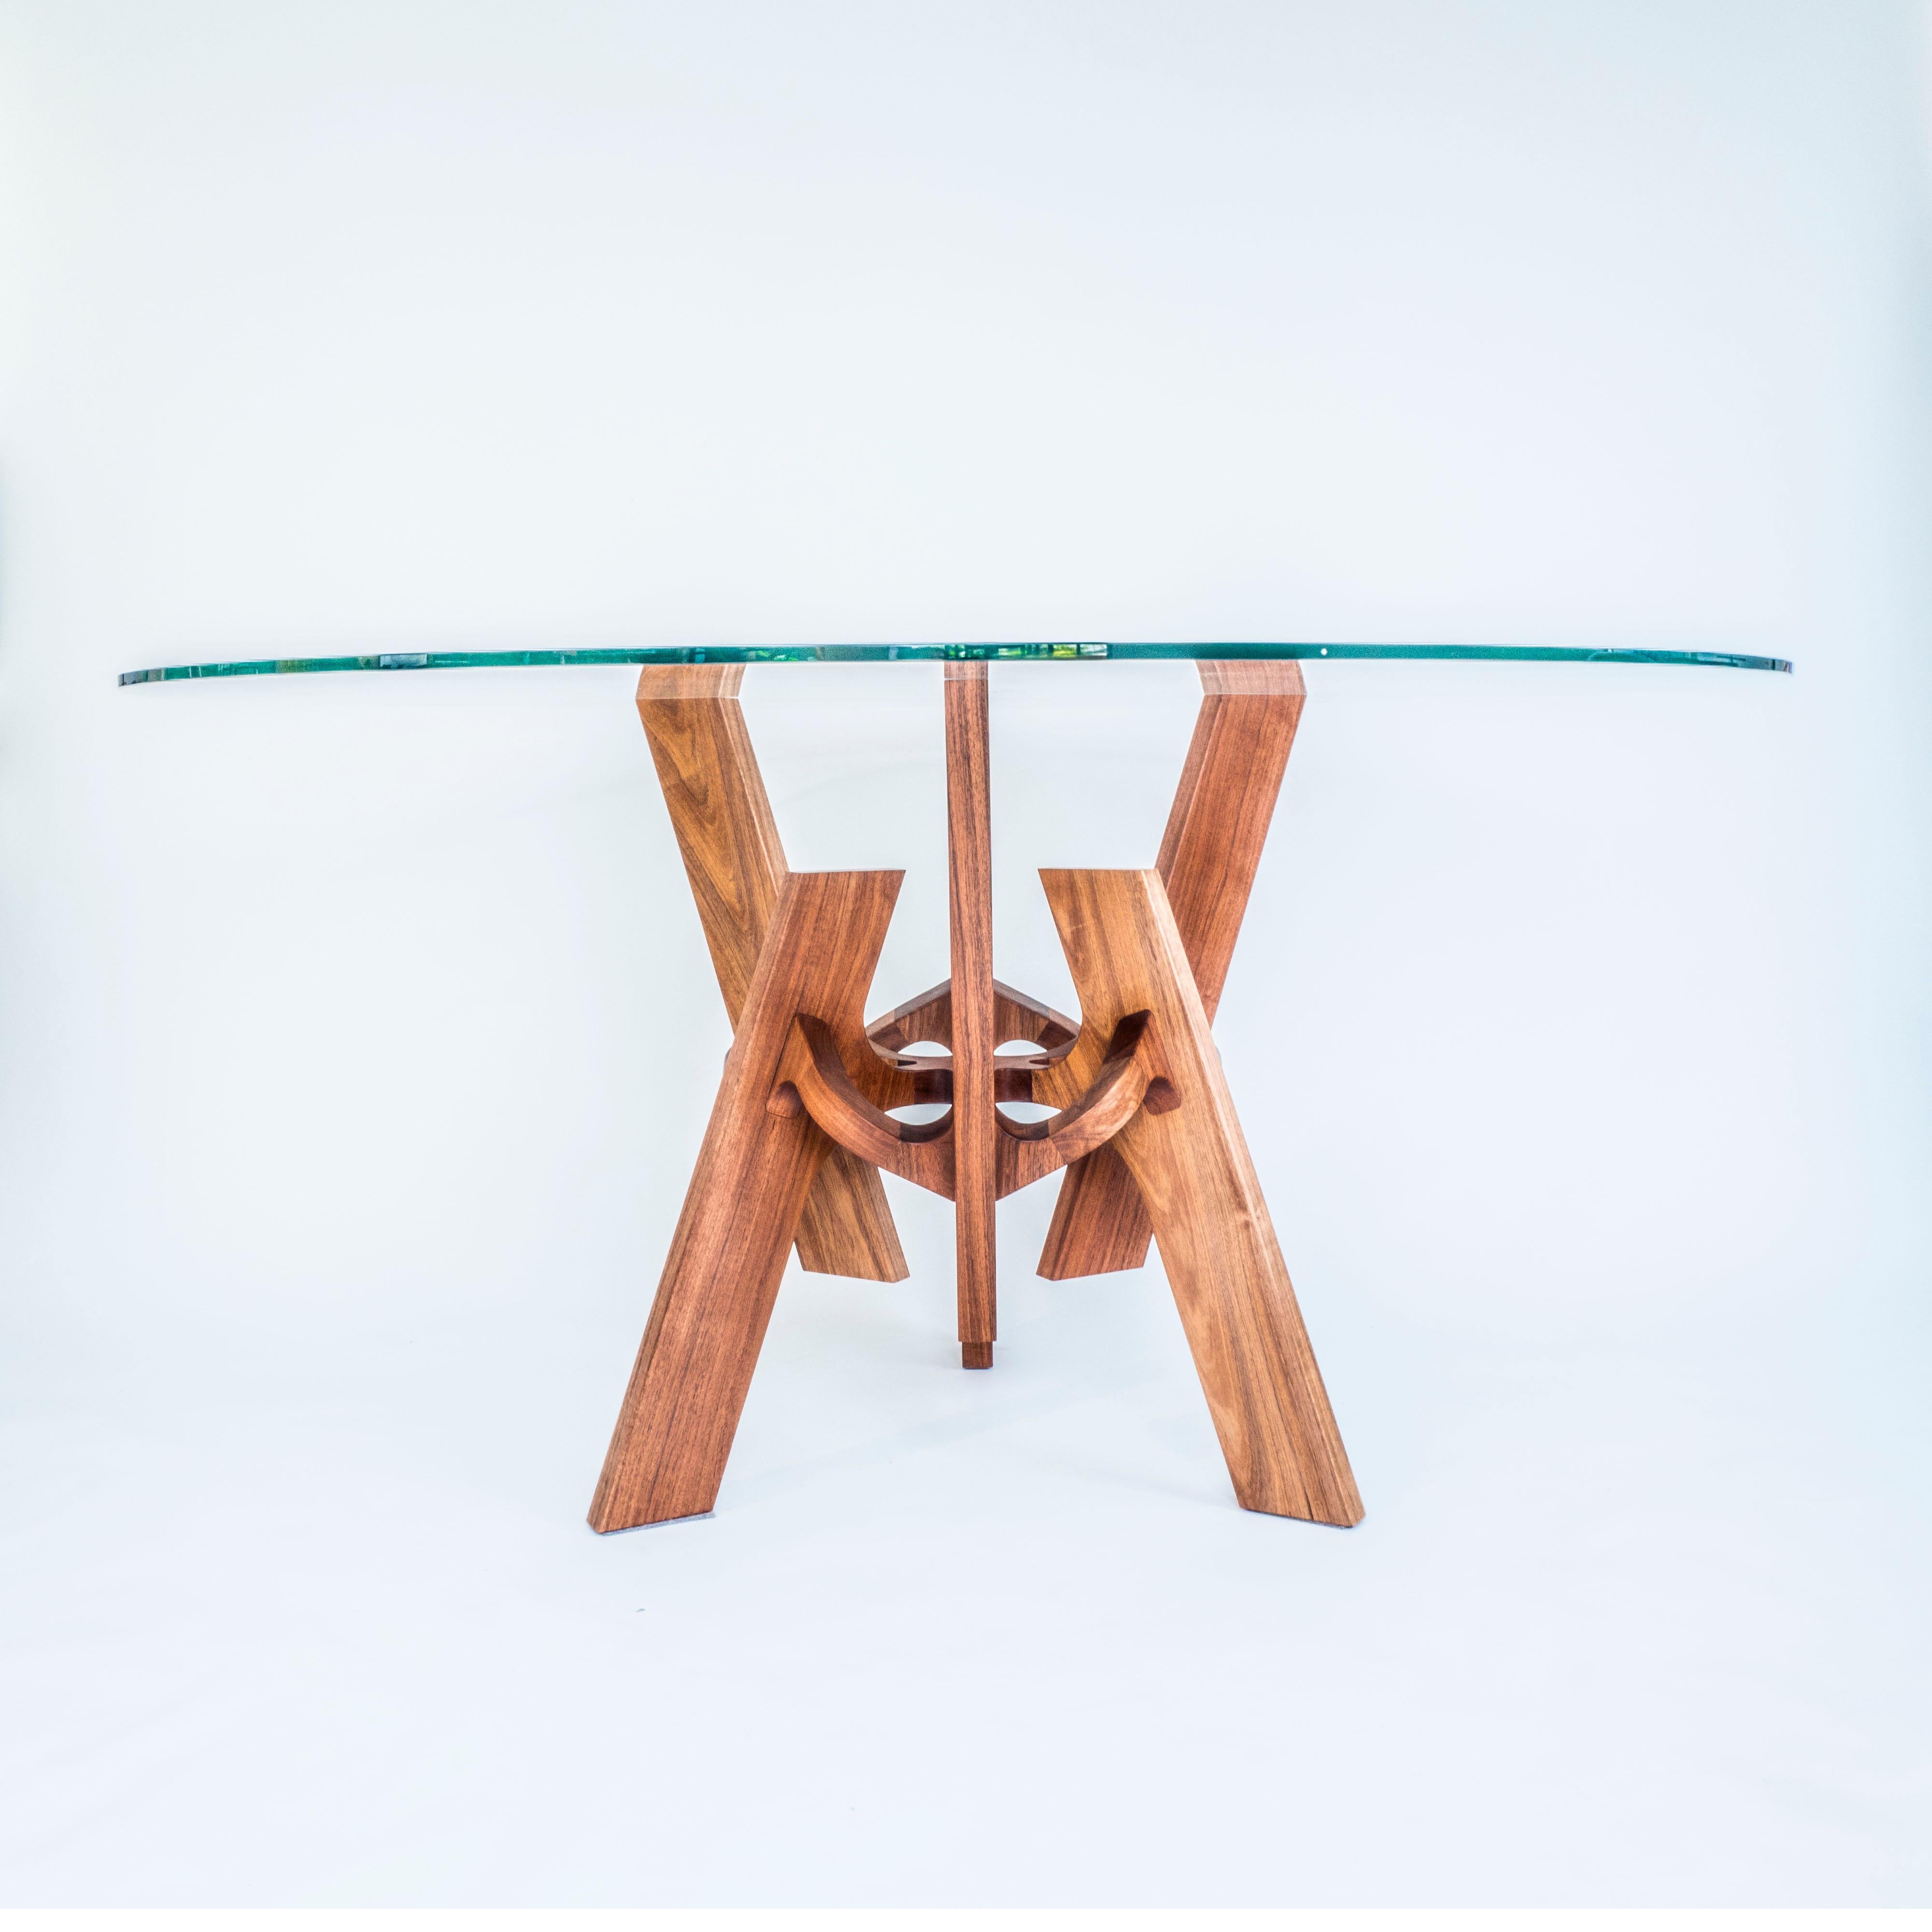 Astra, Geometric Sculptural Center Table Made of Solid Wood by Pedro Cerisola For Sale 12